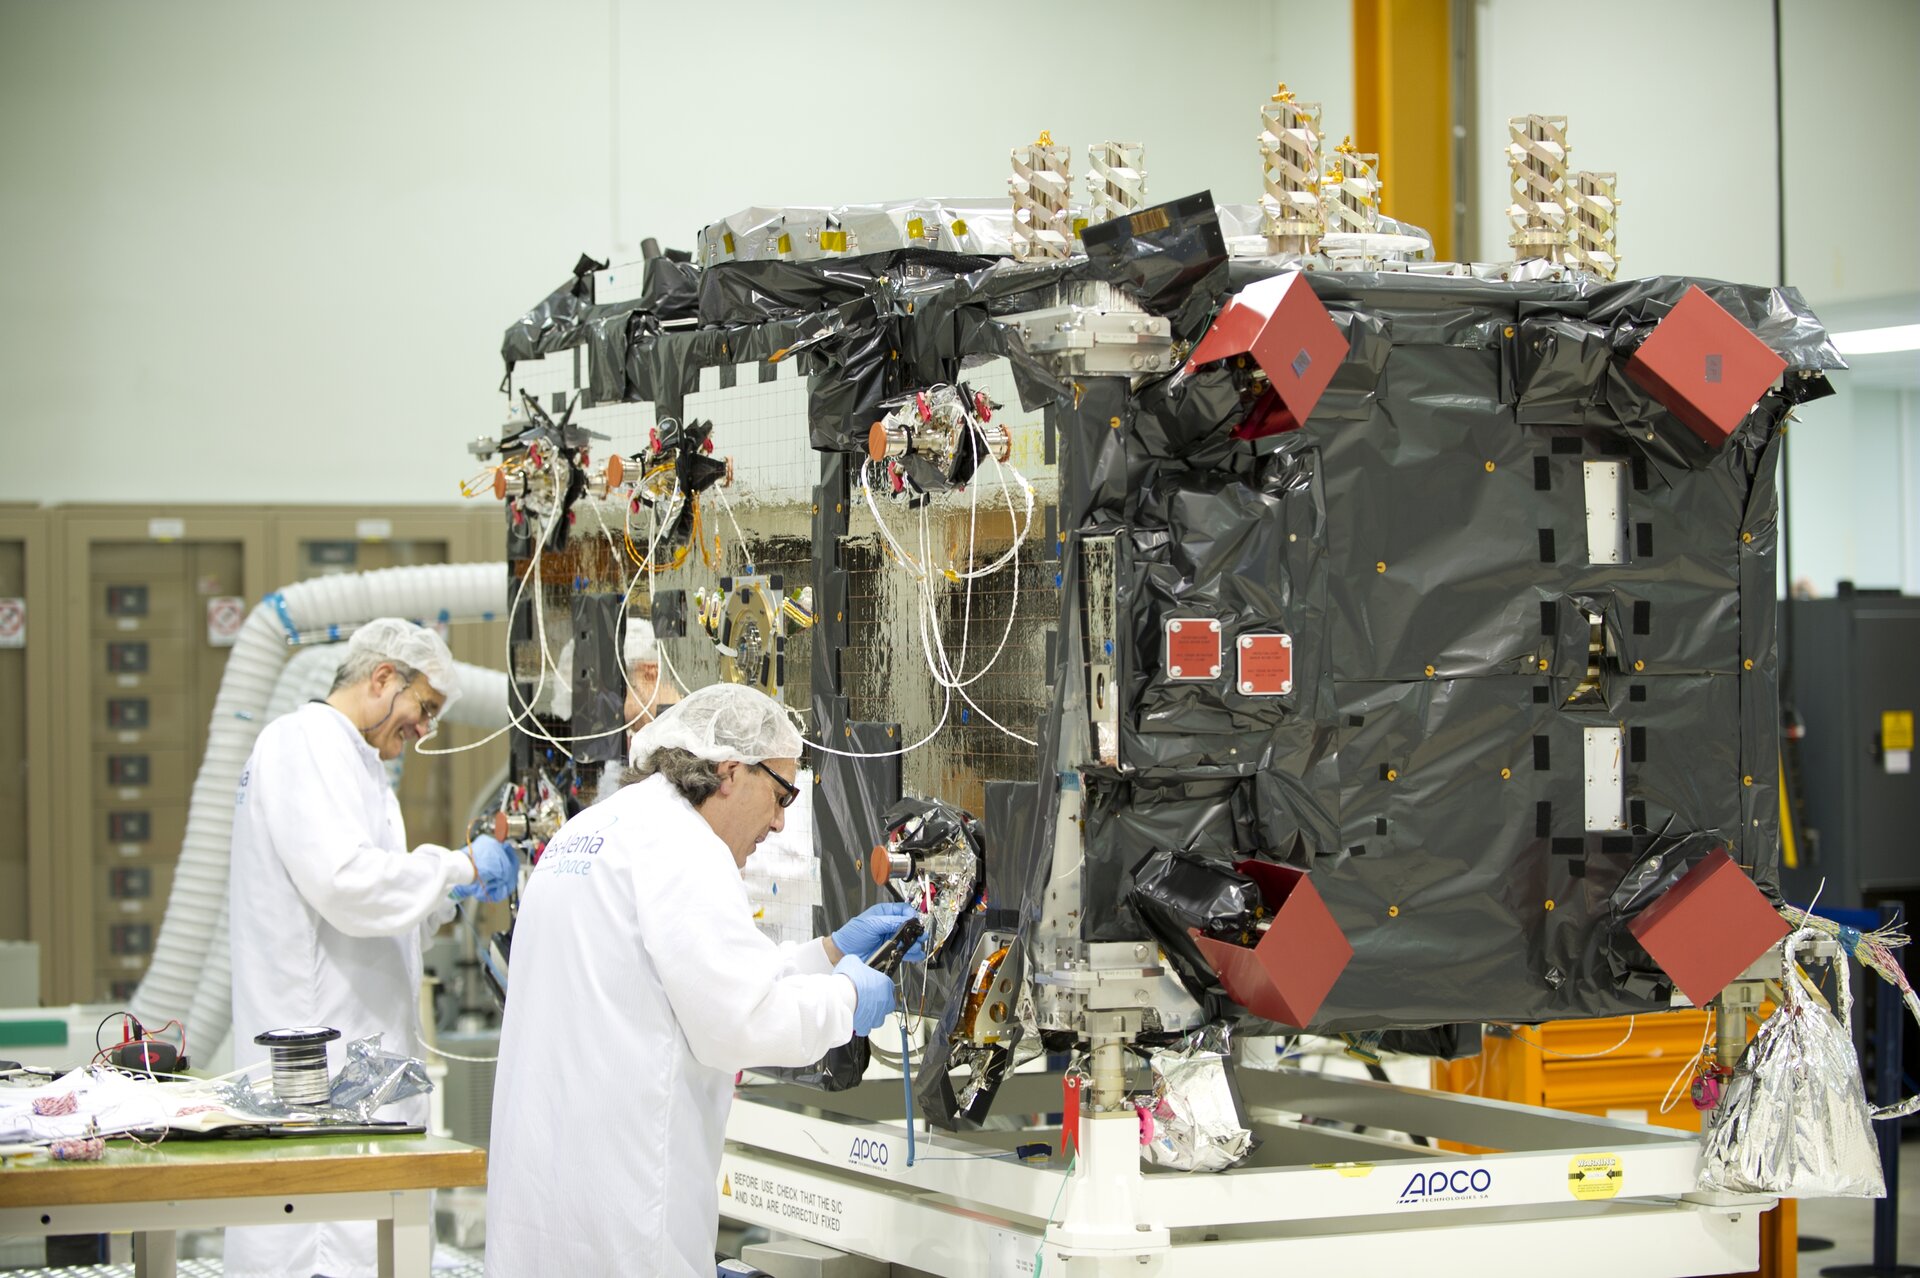 IOV assembled and tested by Thales Alenia Space